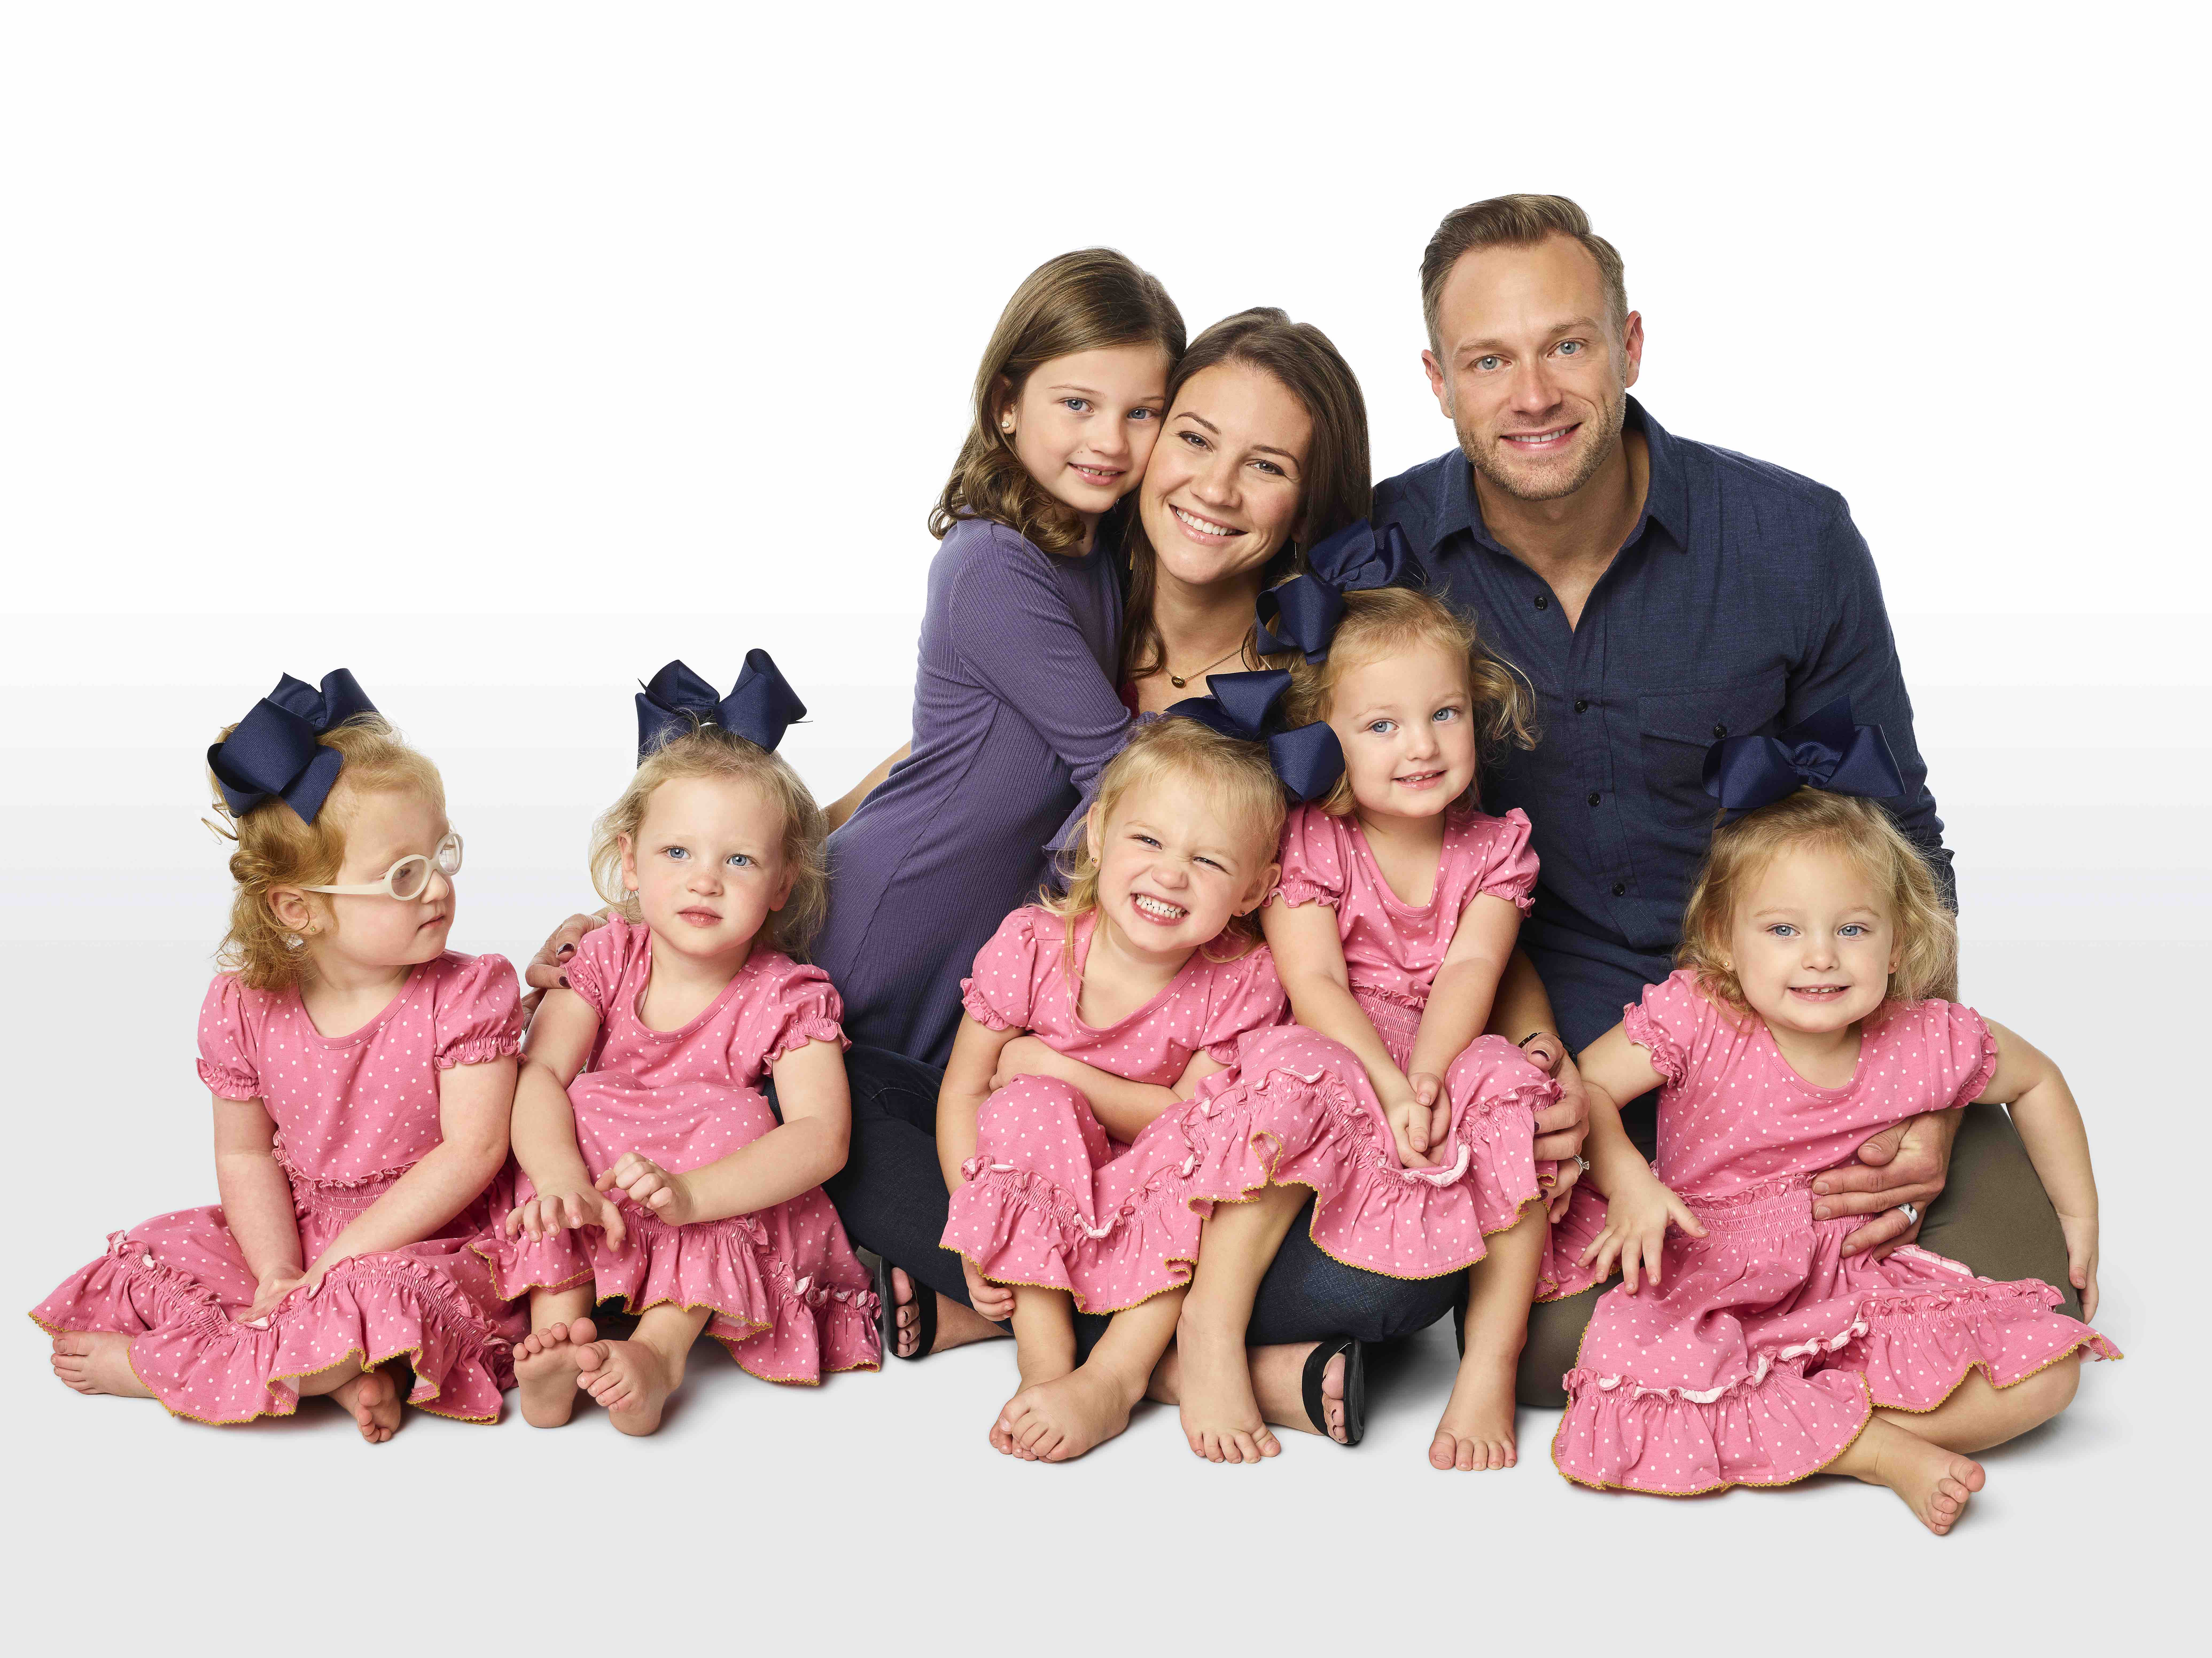 Danielle Busby from ‘OutDaughtered’ Has a New Fitness Clothing Line